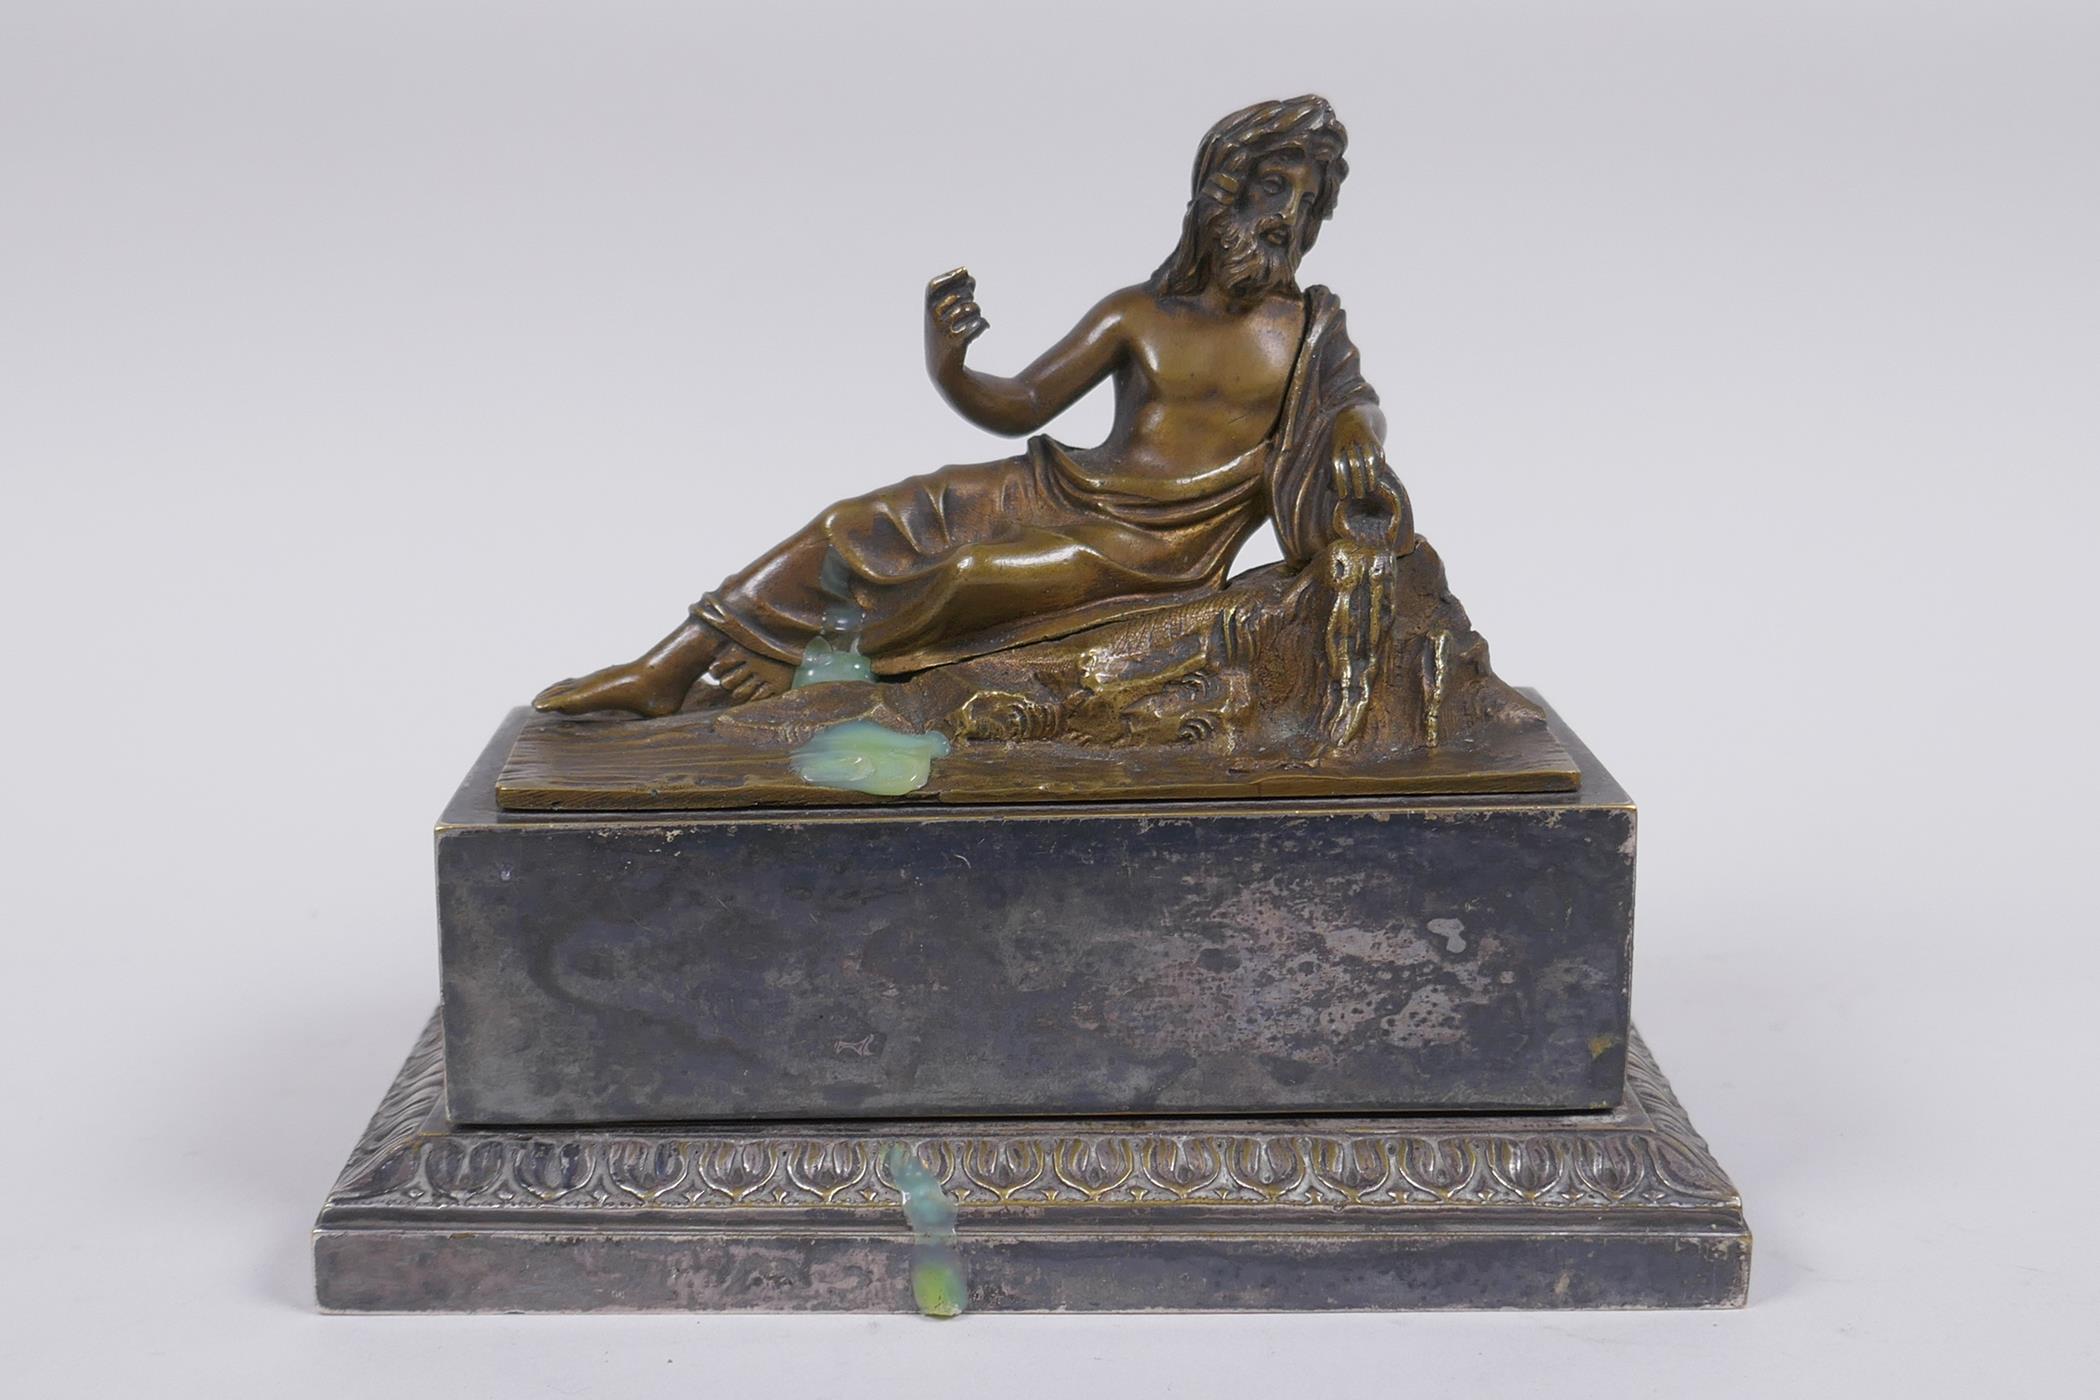 A Grand Tour silver plated ink well with bronze mount in the form of a reclining Greco-Roman figure,